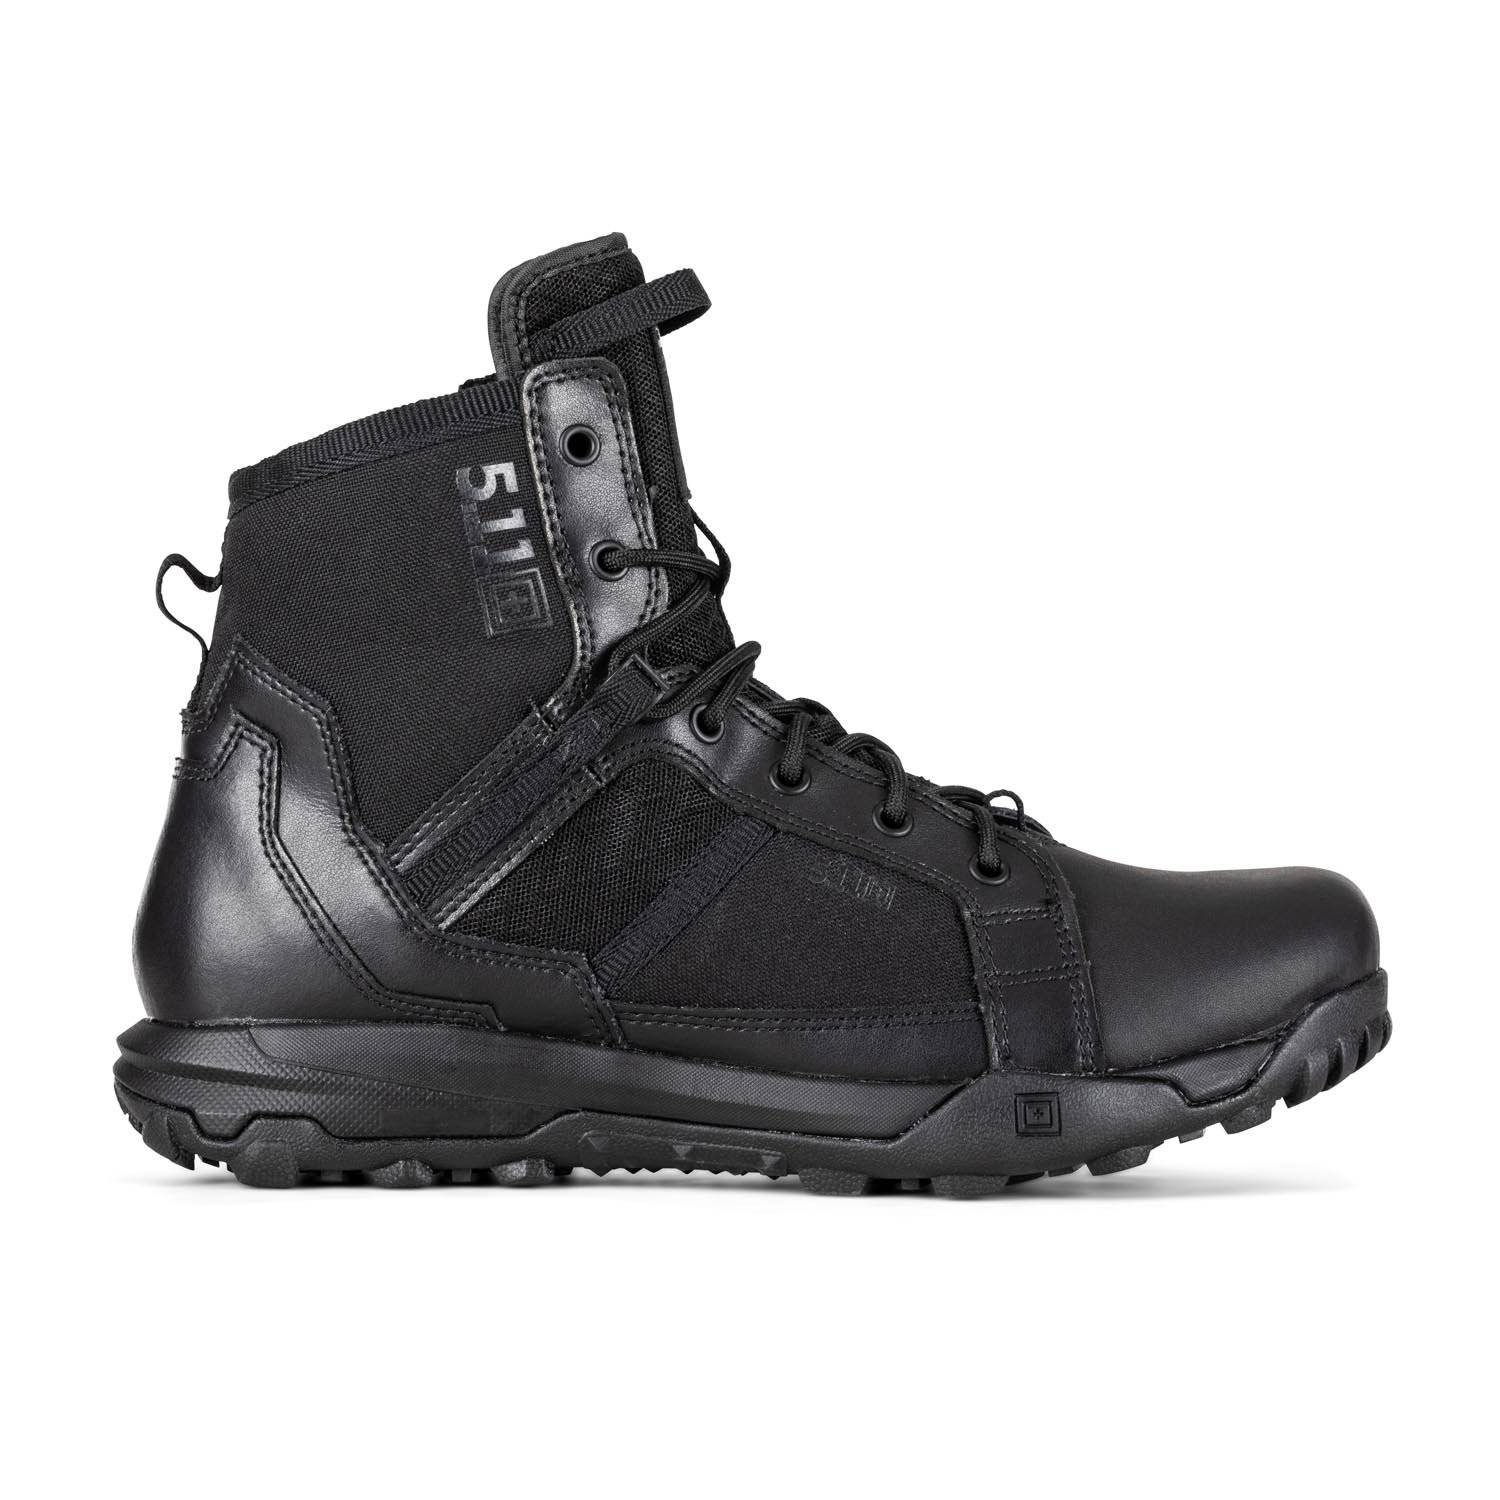 5.11 Tactical A/T 6” Side Zip Boots